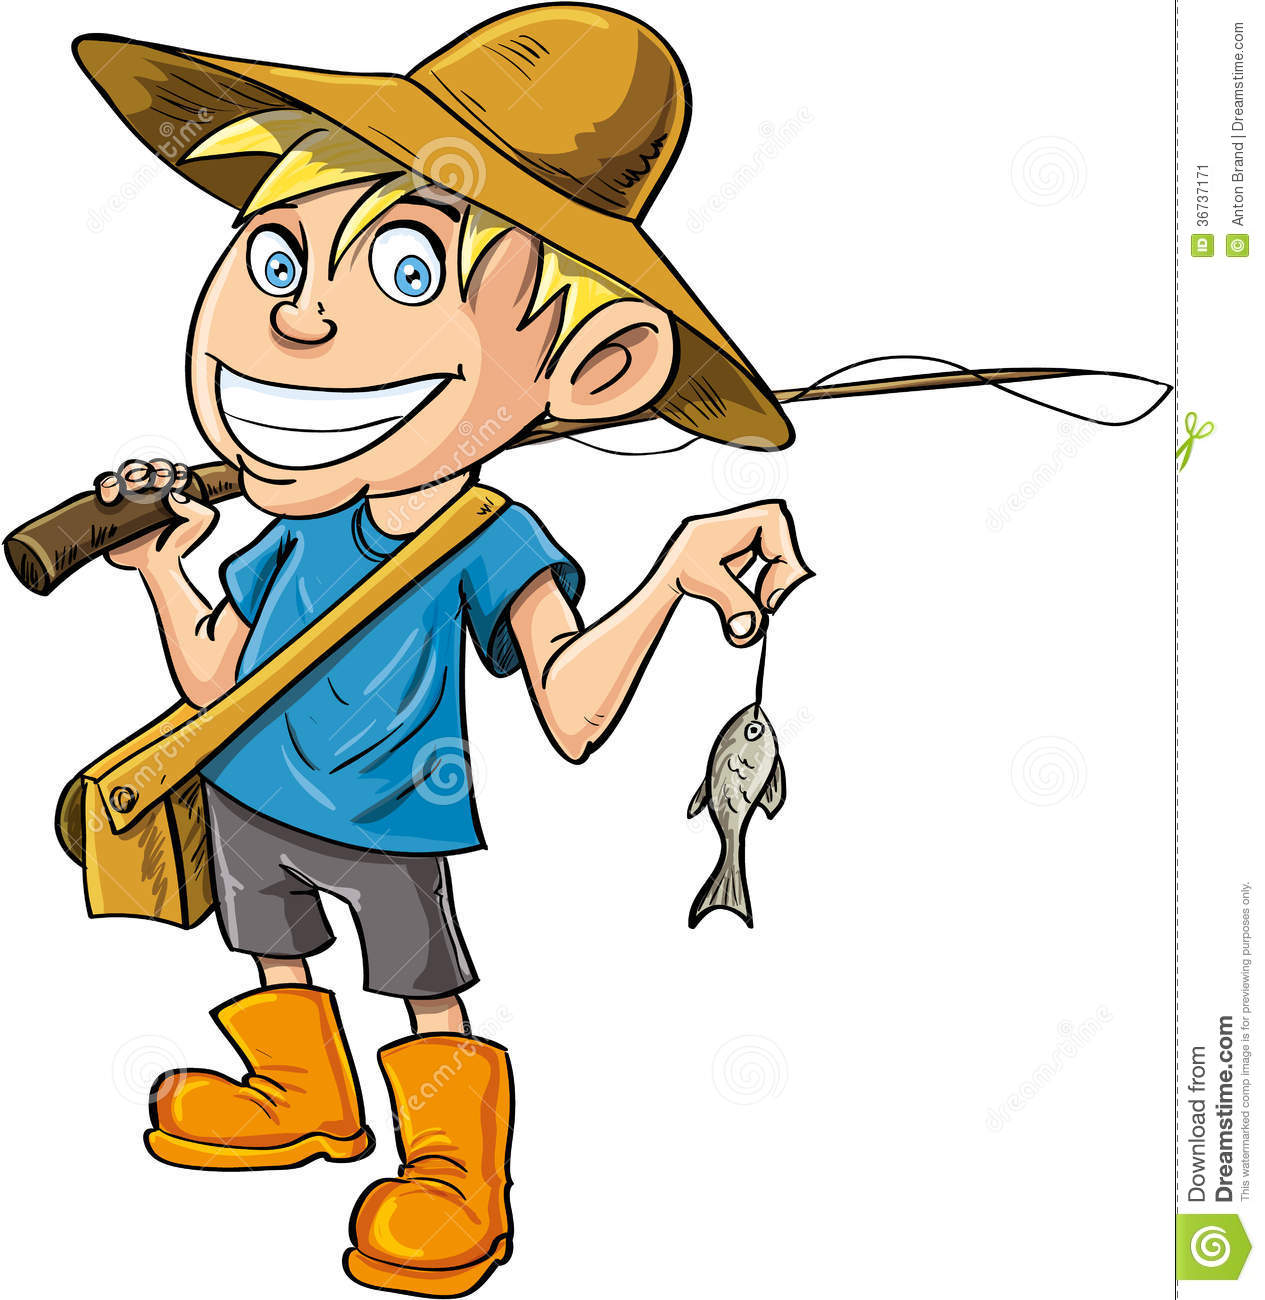 More Similar Stock Images Of   Cartoon Fisherman With A Tiny Fish  